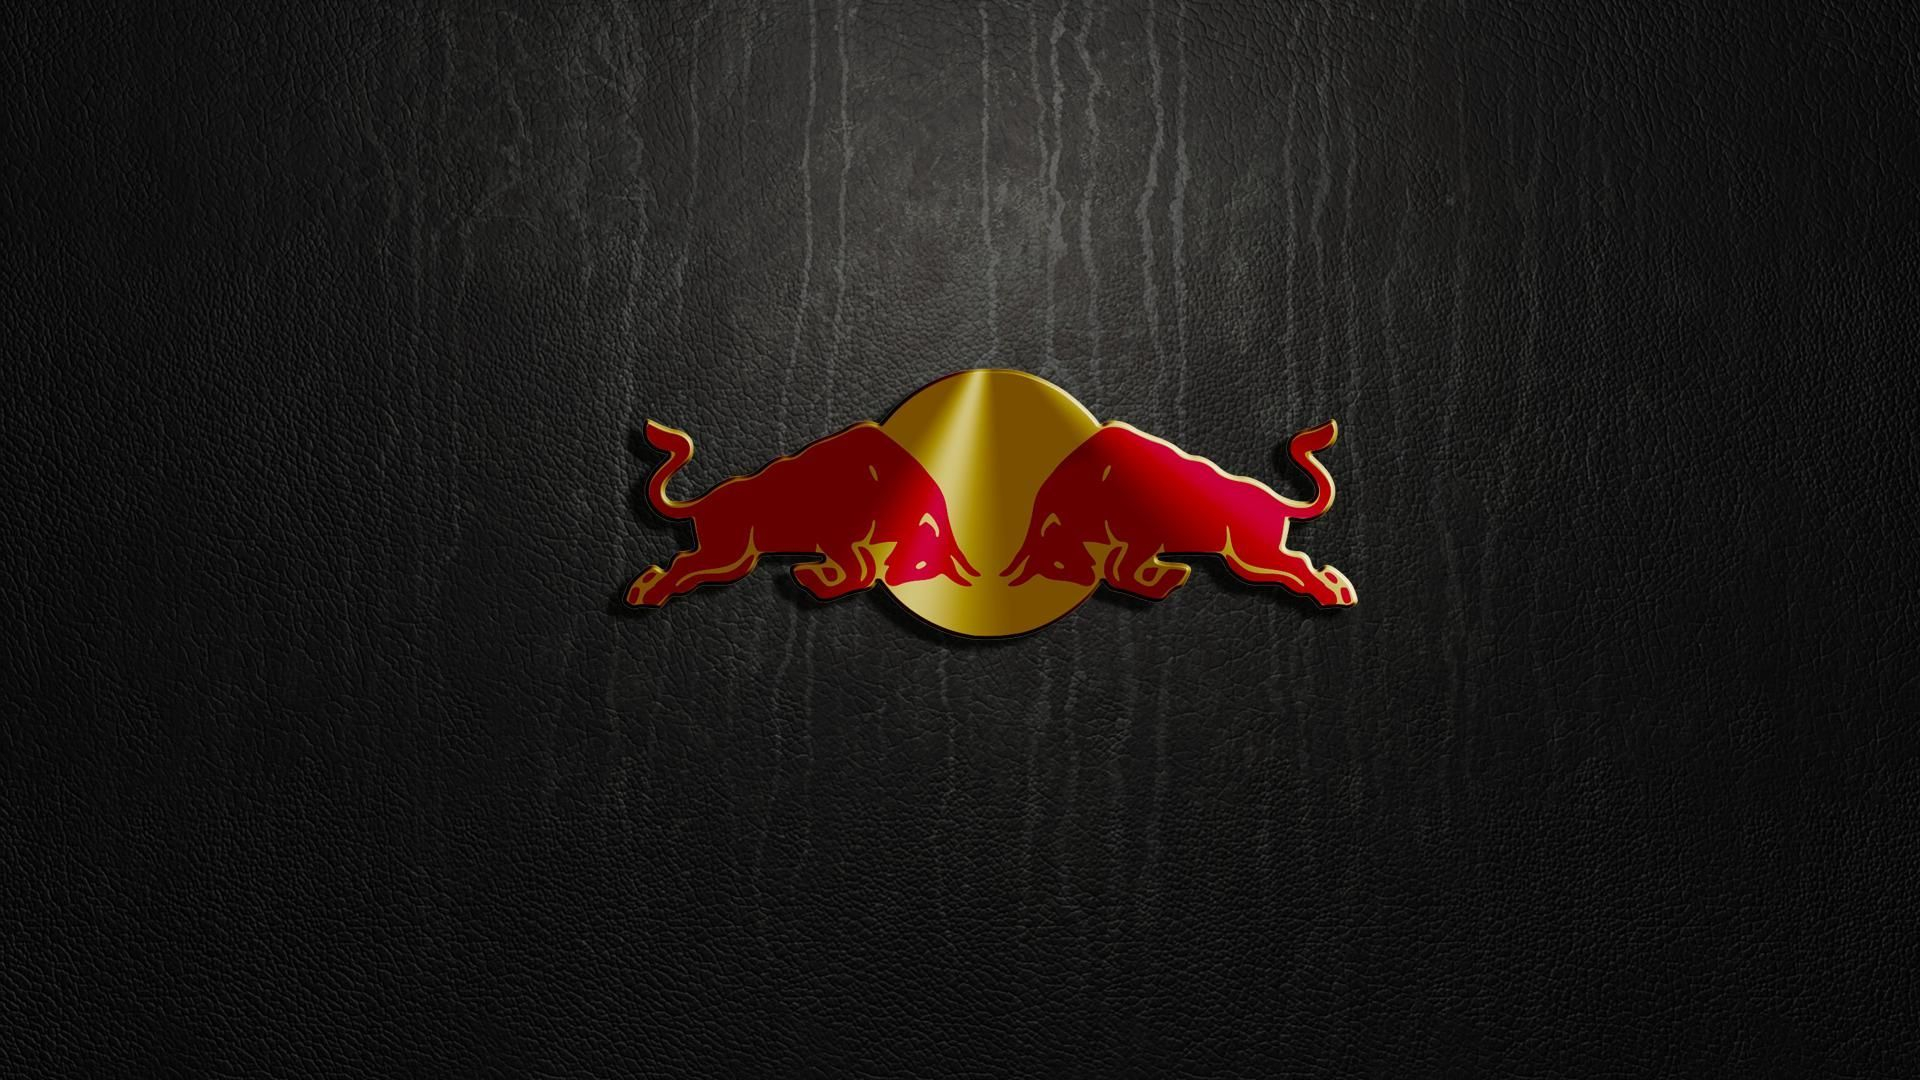 1920x1080 4K Red Bull Wallpapers Top Free 4K Red Bull Backgrounds